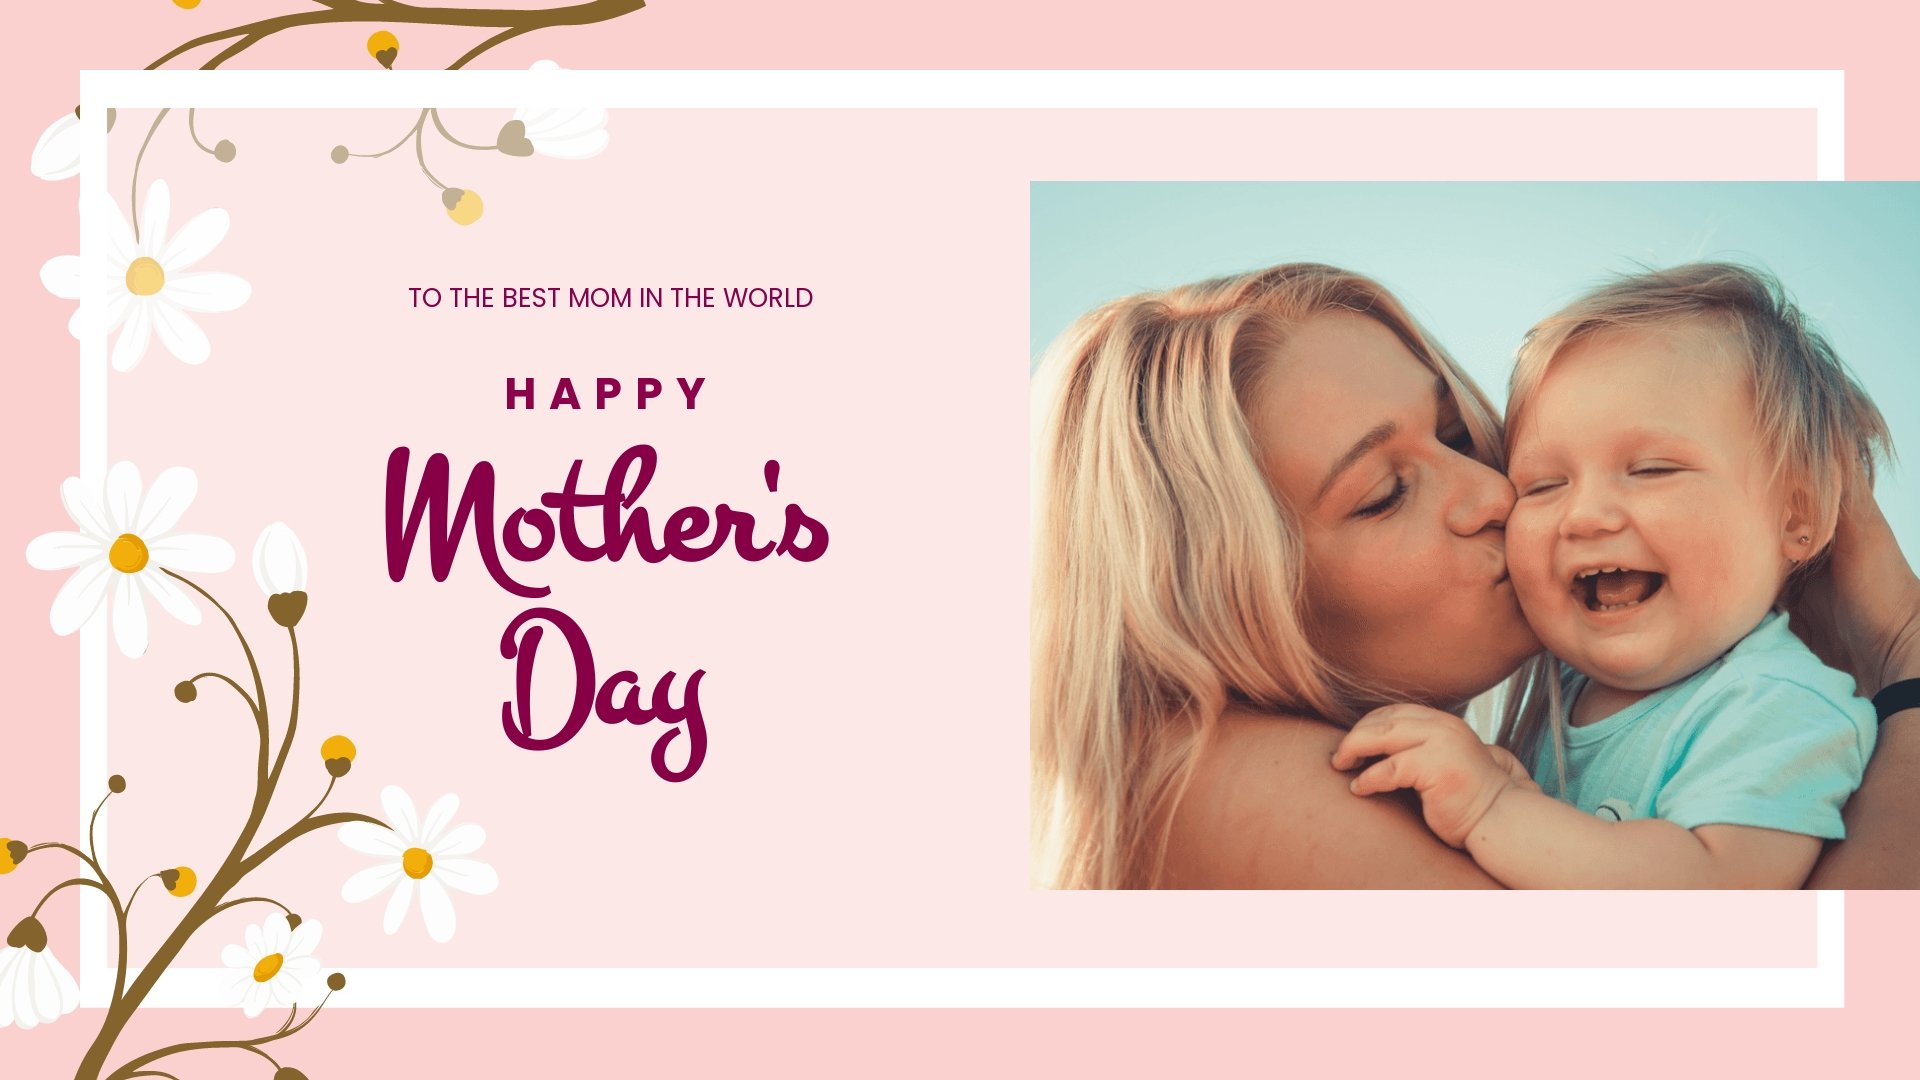 Mother's Day Greeting Image